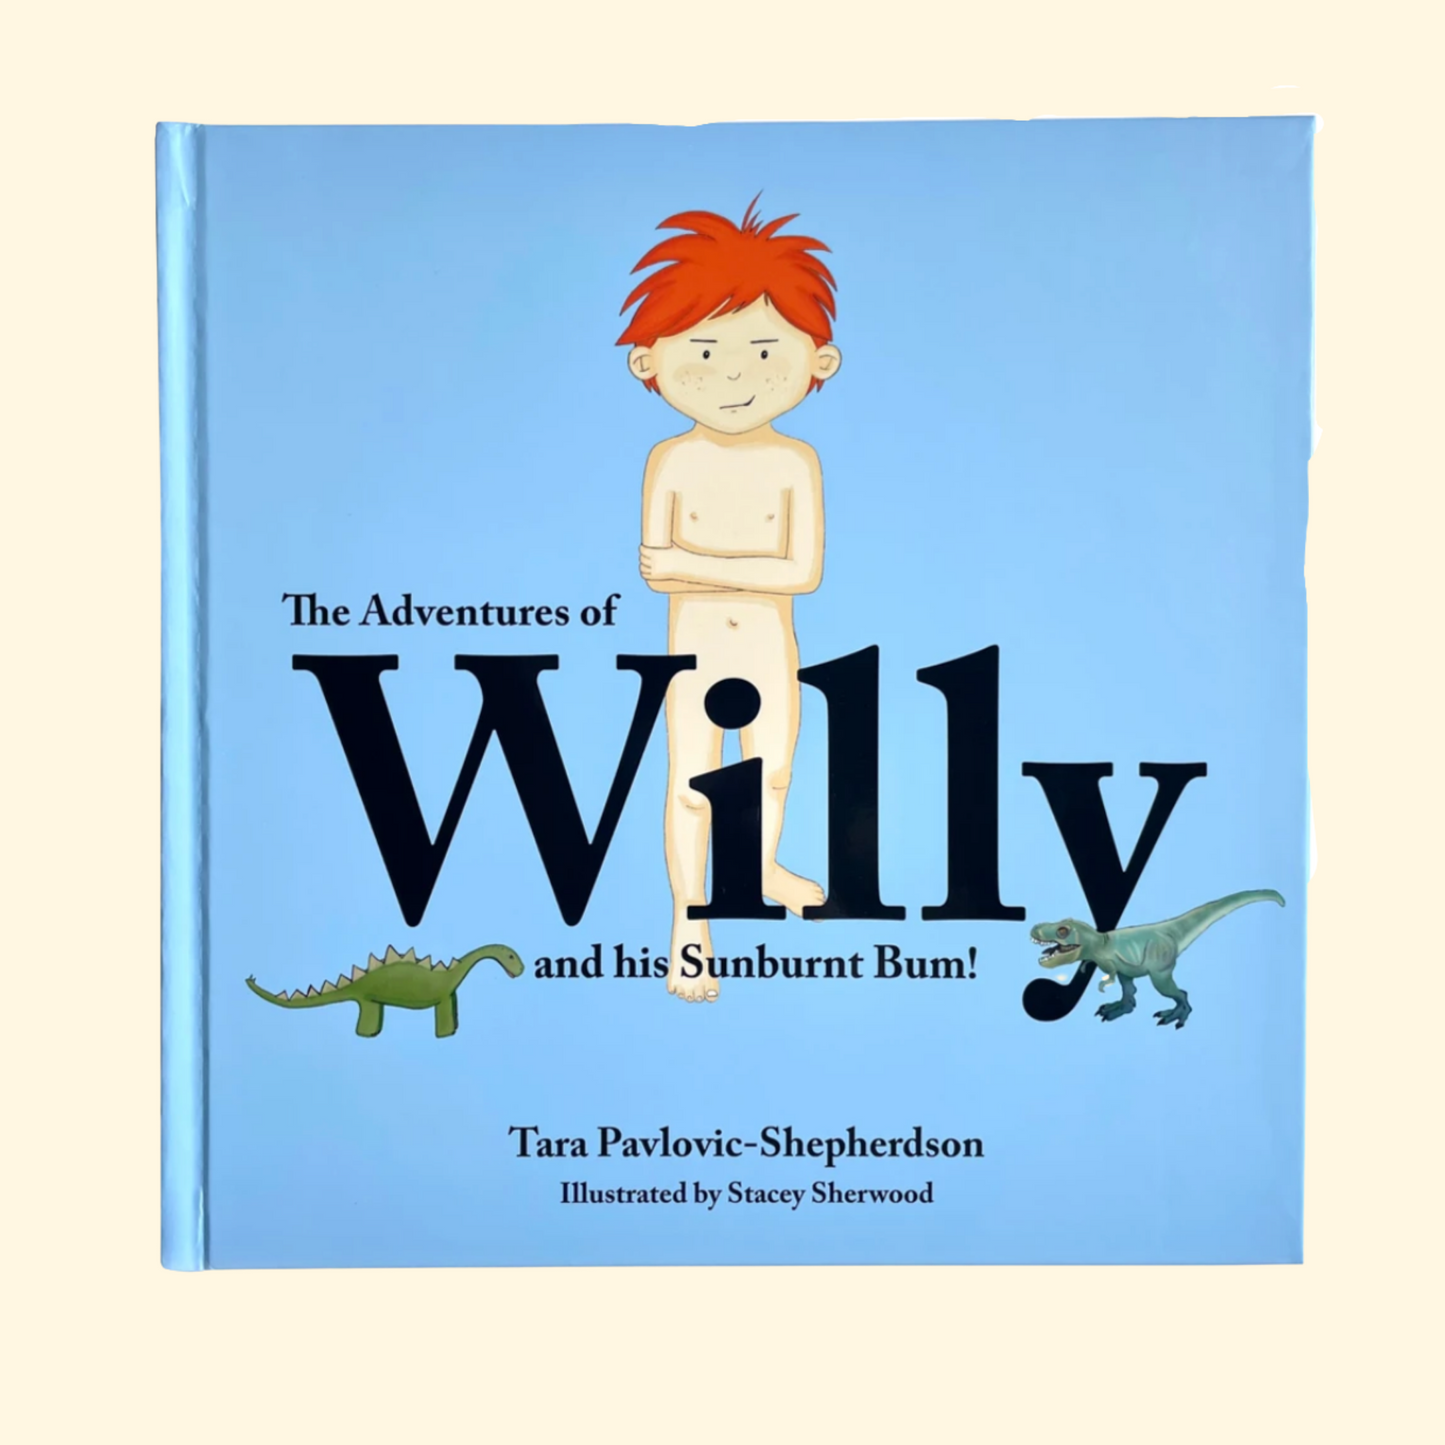 Pack of 2 Books - The Adventures of Willy and his Sunburnt Bum! Children's book